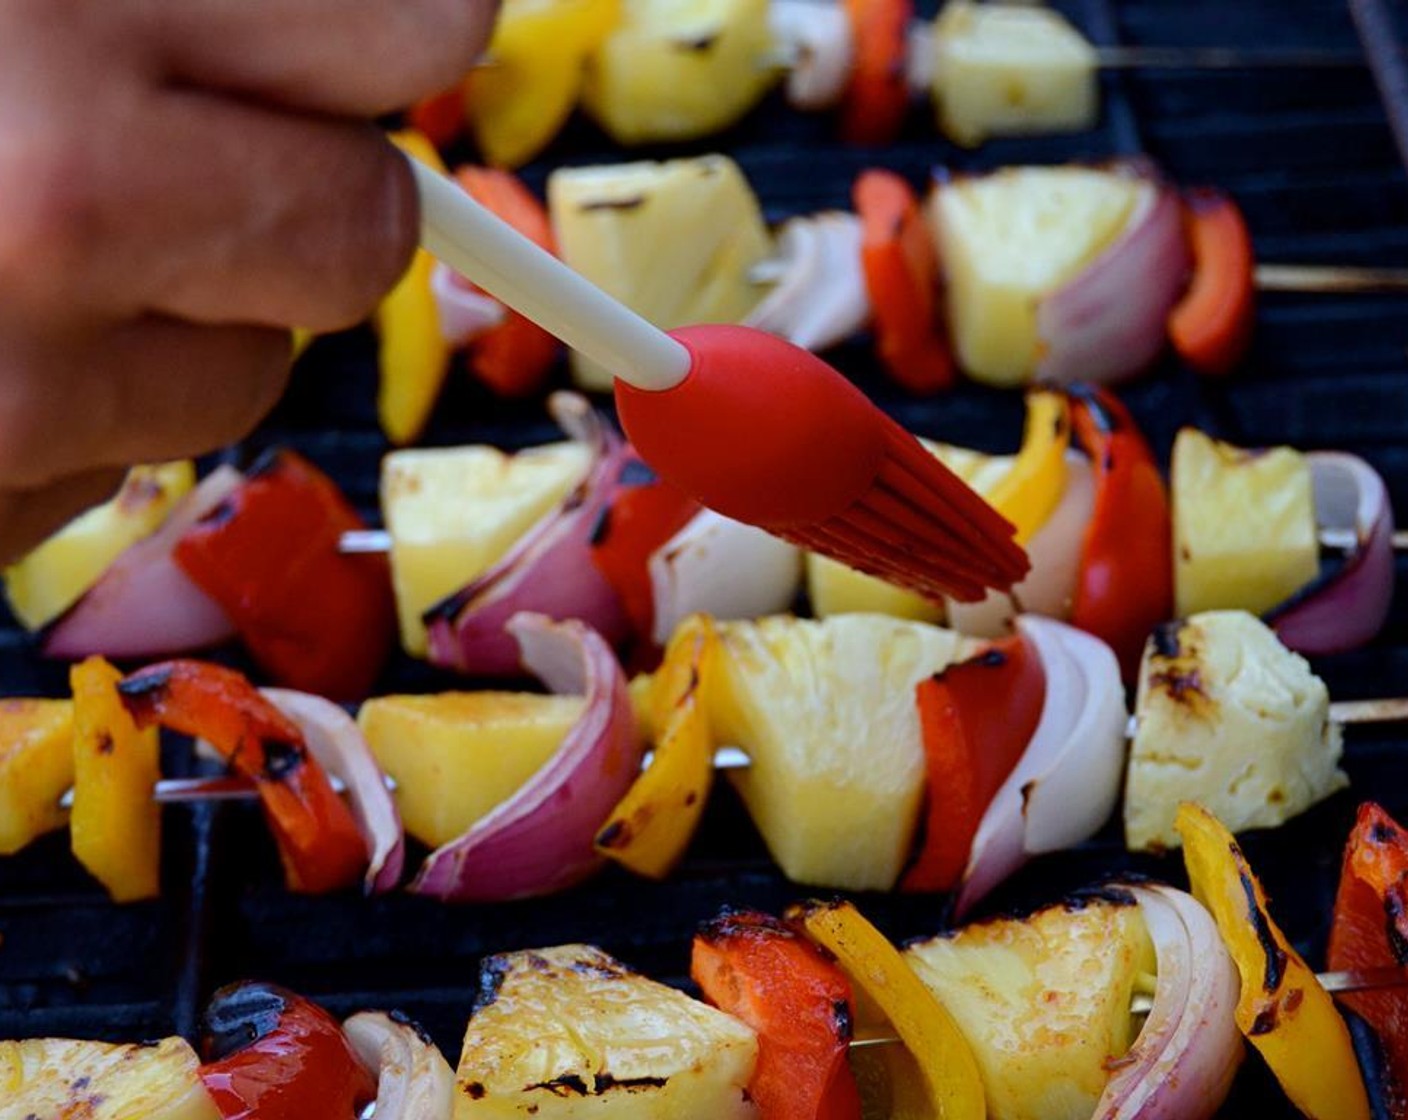 step 9 Heat the grill to medium-high heat, about 450 degrees F (230 degrees C). Place the vegetable skewers on the grill and brush with marinade. Flip the skewers after 3-4 minutes and brush on more marinade. Cook the vegetables until crisp-tender and slightly charred.